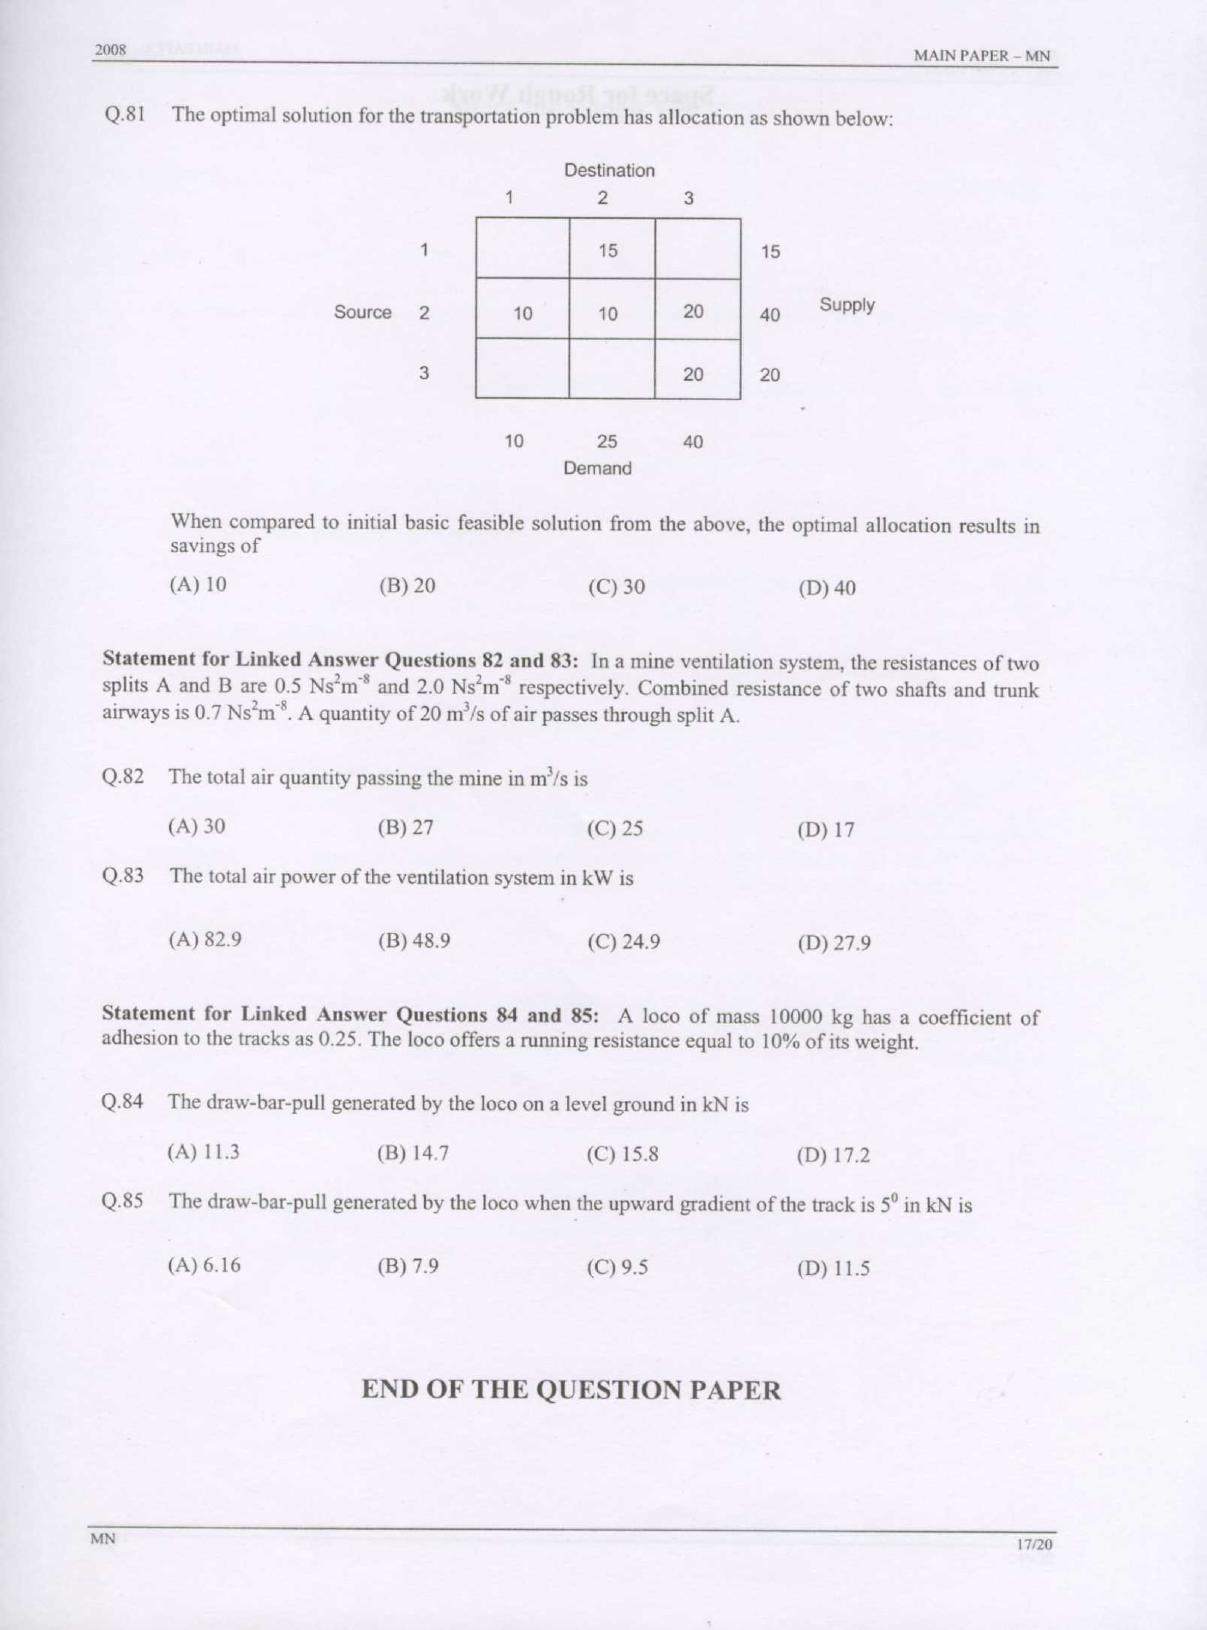 GATE 2008 Mining Engineering (MN) Question Paper with Answer Key - Page 17